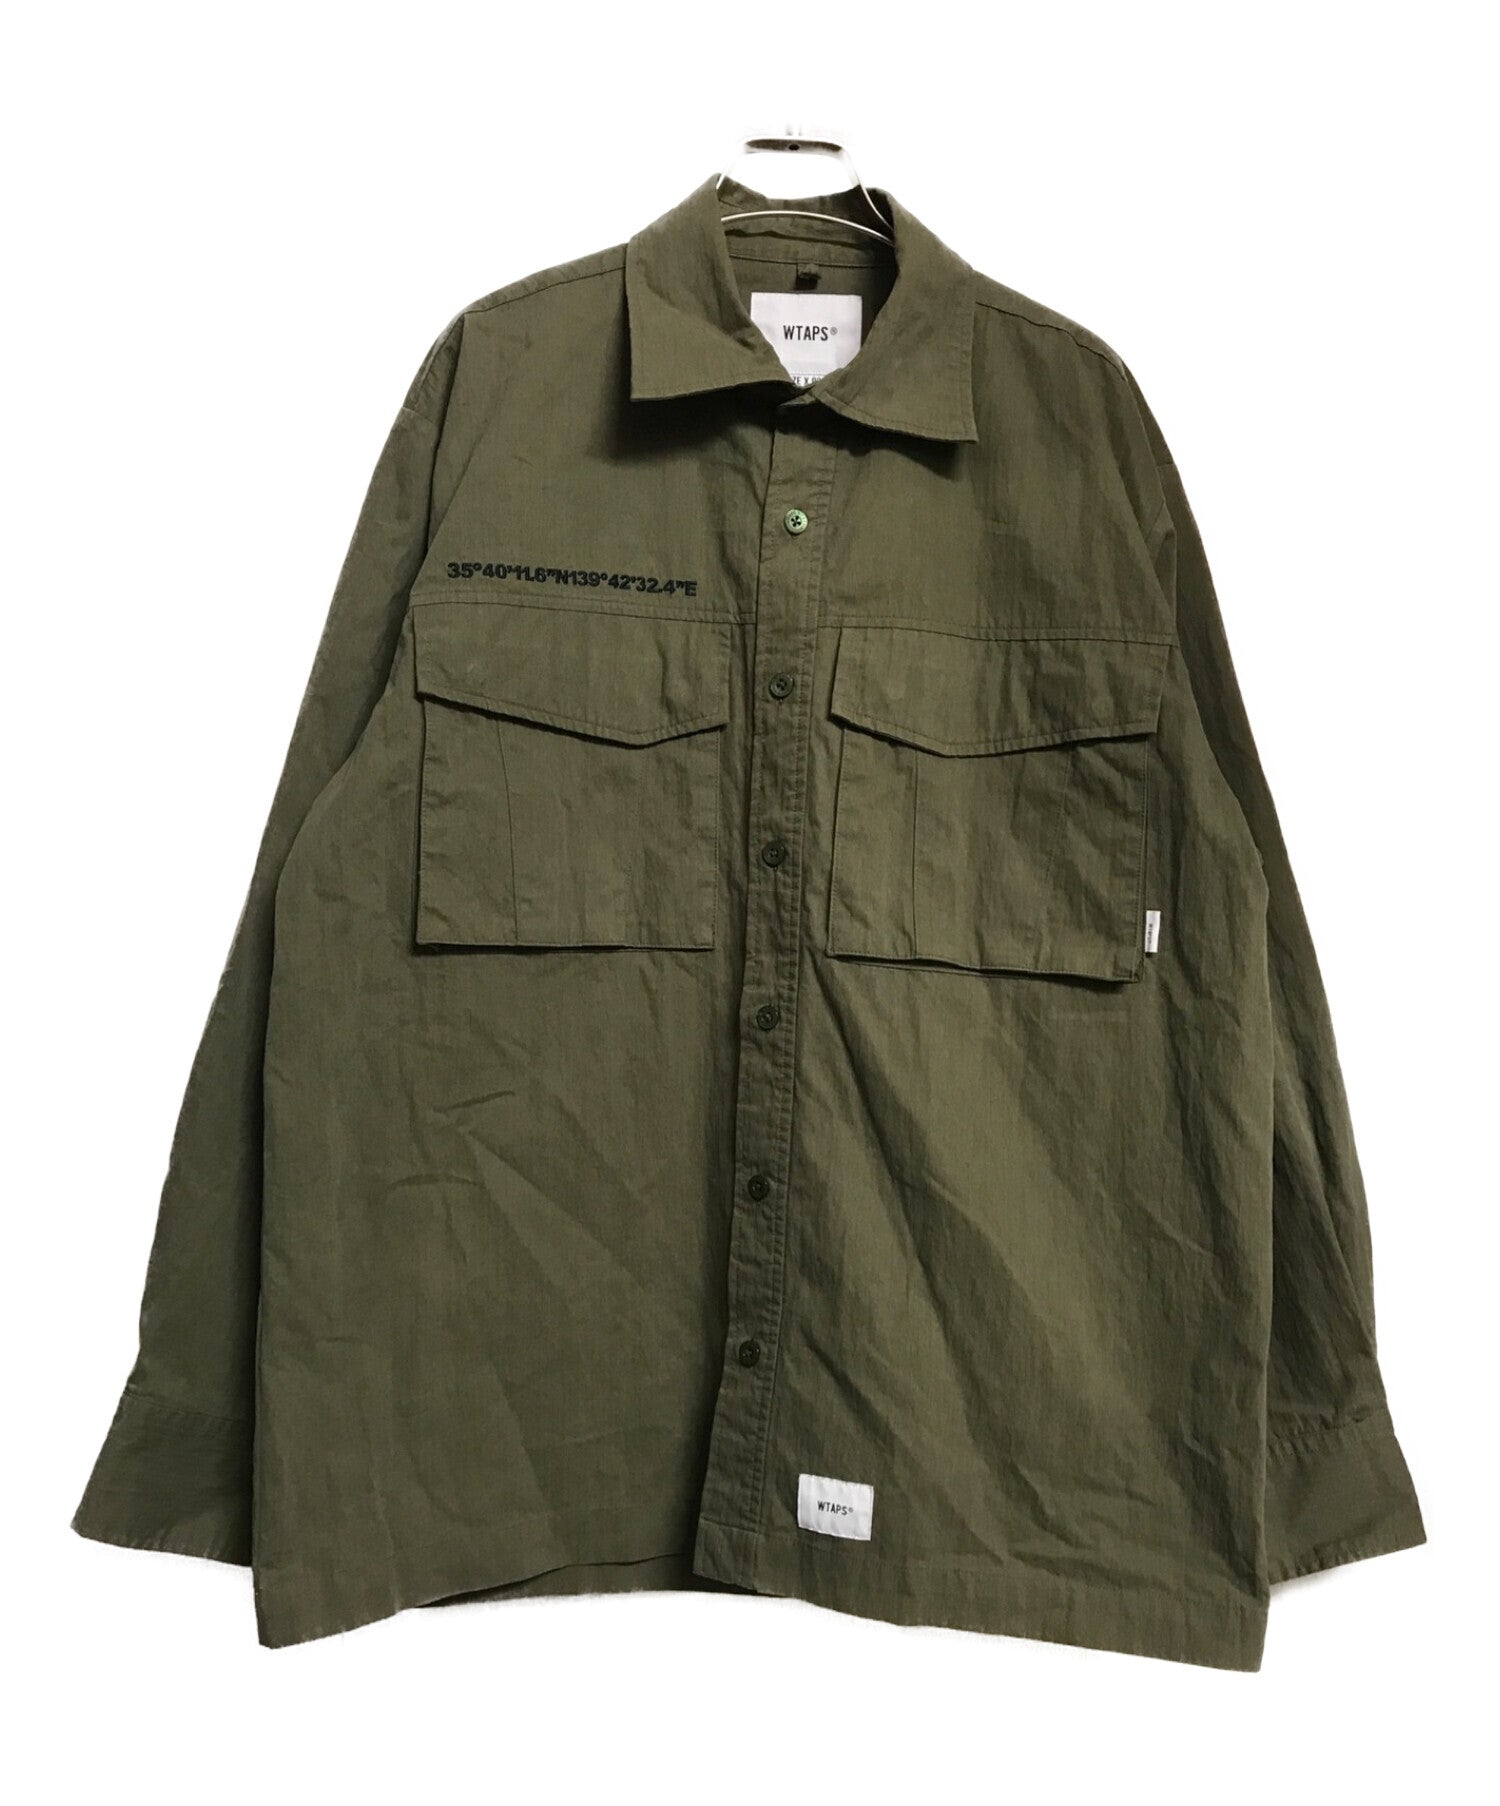 Wtaps ex40_collection BUDS LS-